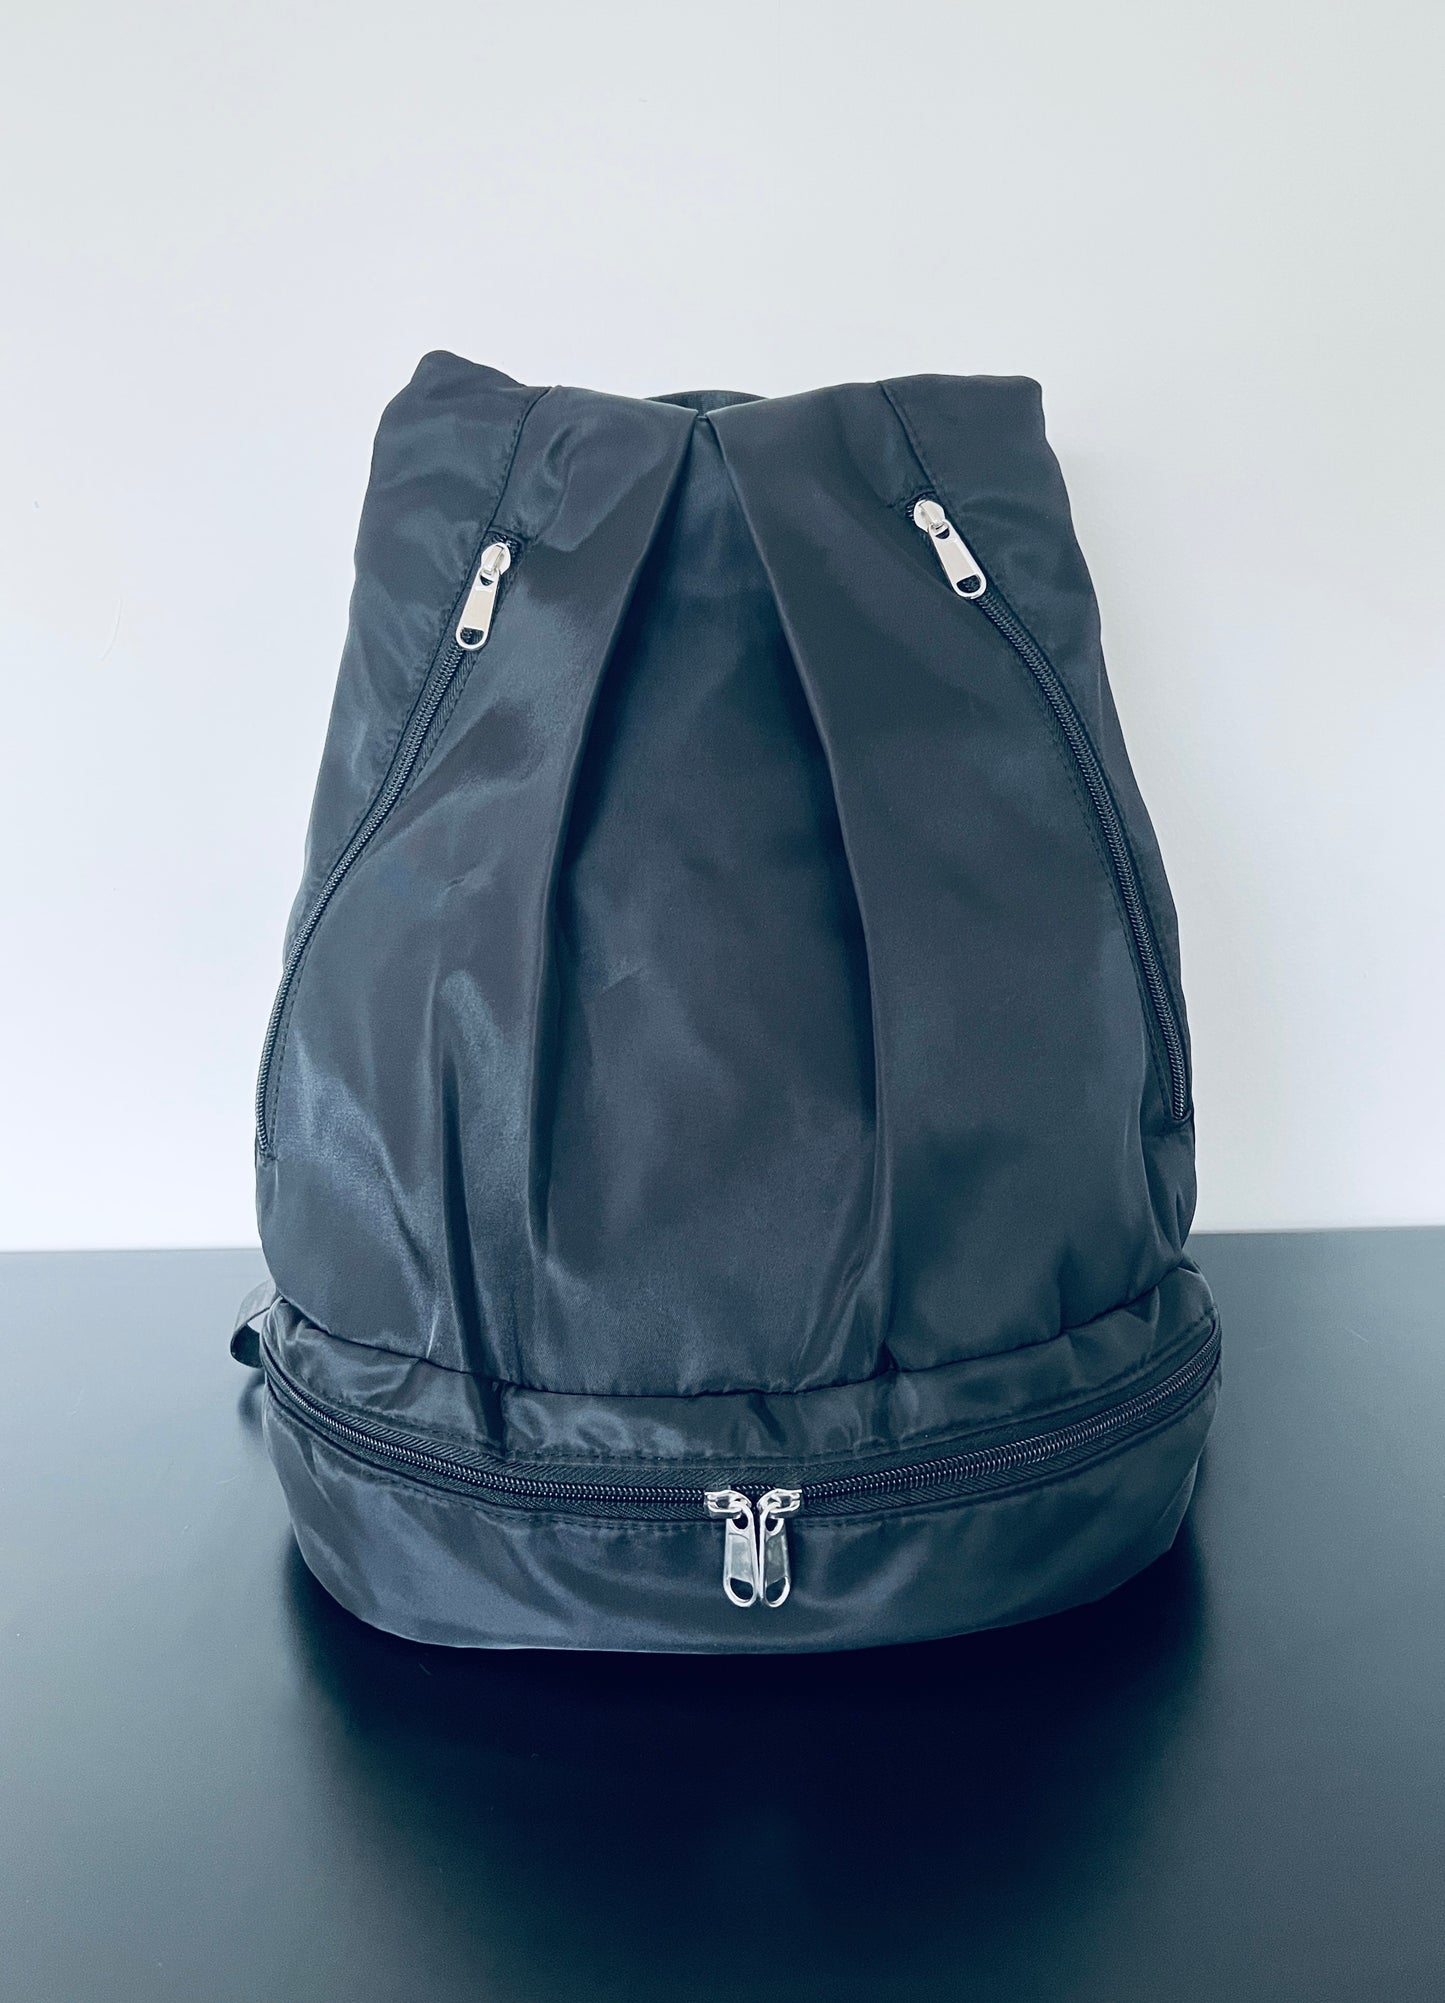 Dance back pack for ballet from The Collective Dancewear 